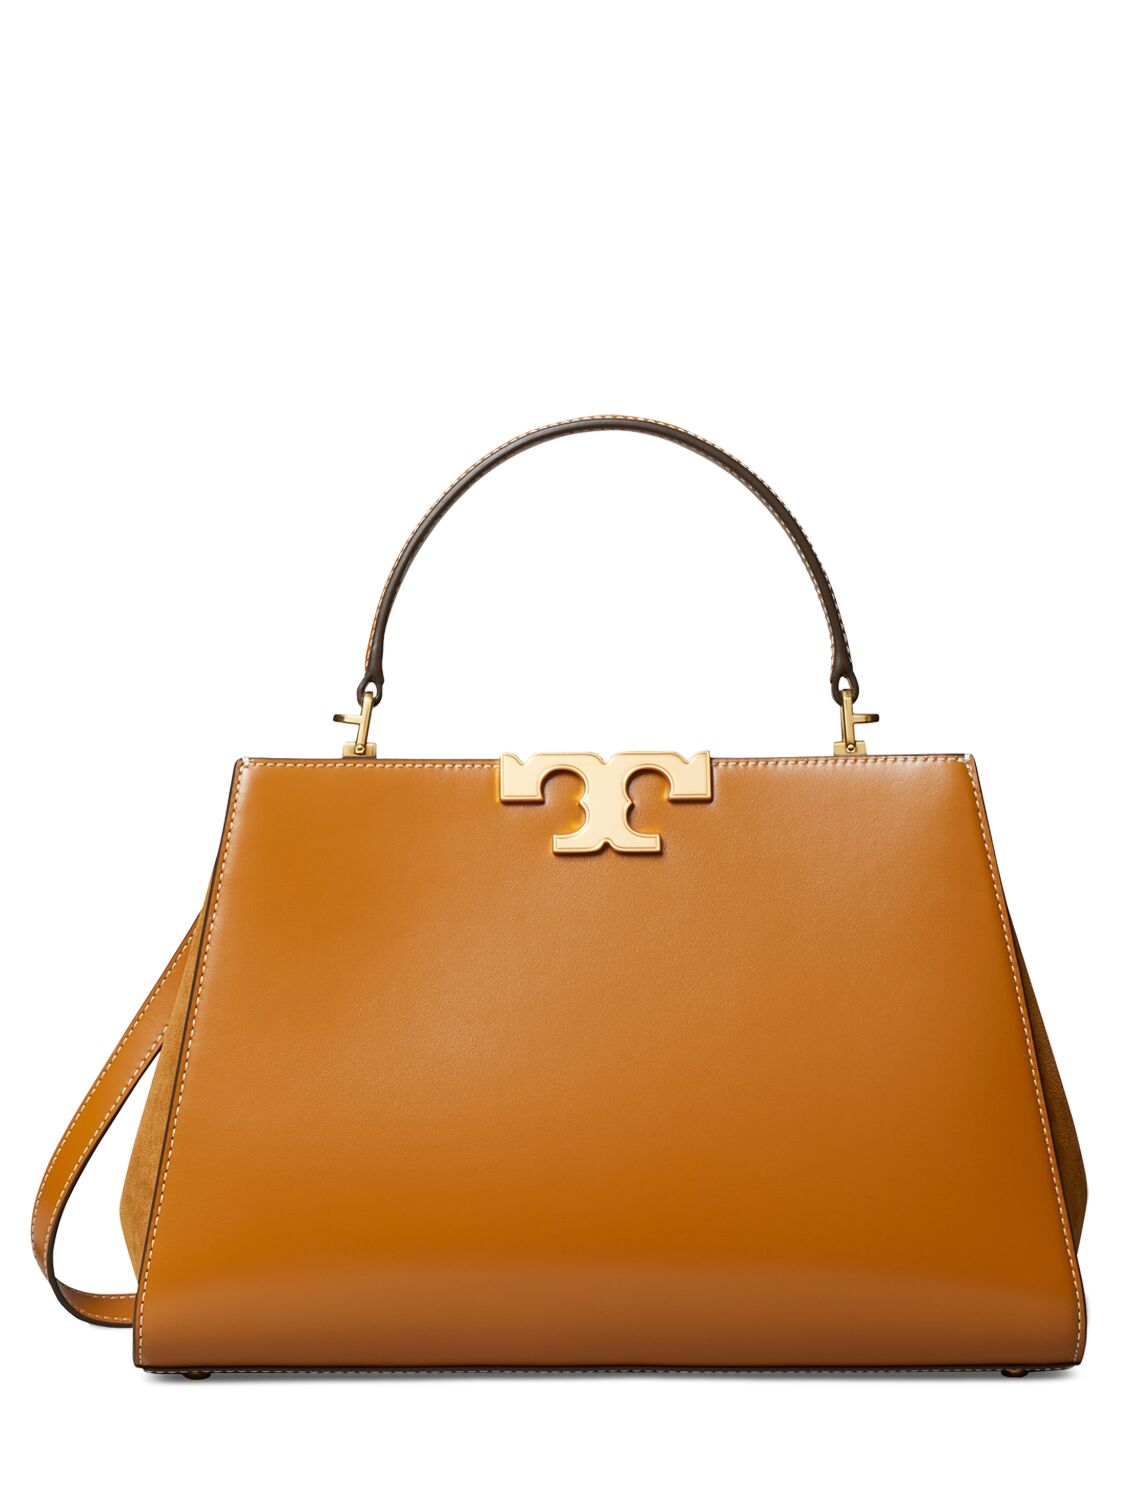 Tory Burch Eleanor Satchel Leather Tote Bag In Whiskey